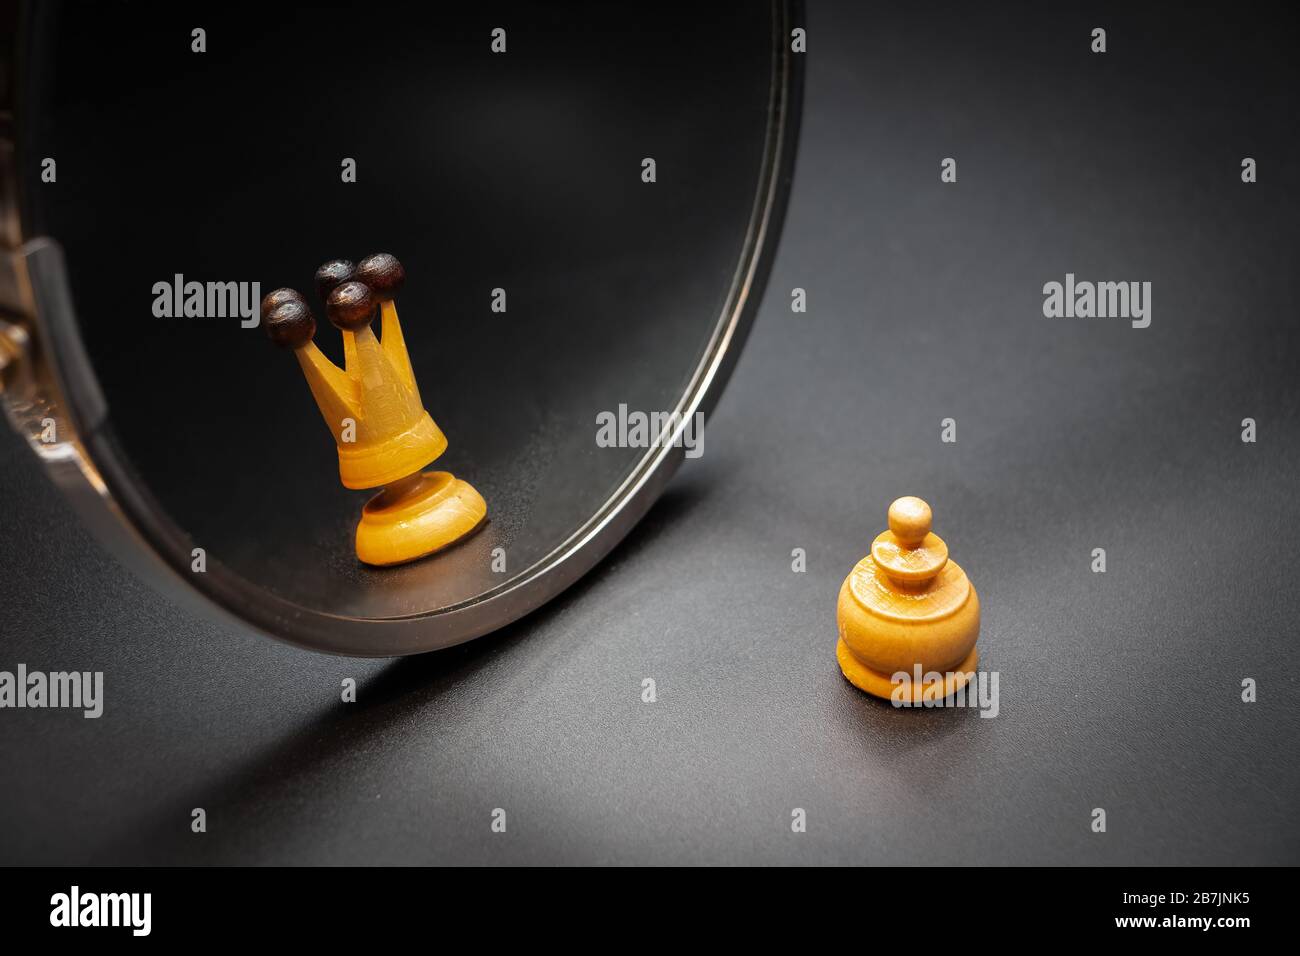 Pawn looking in the mirror and seeing himself like a king with dark background. Psychological concept Stock Photo